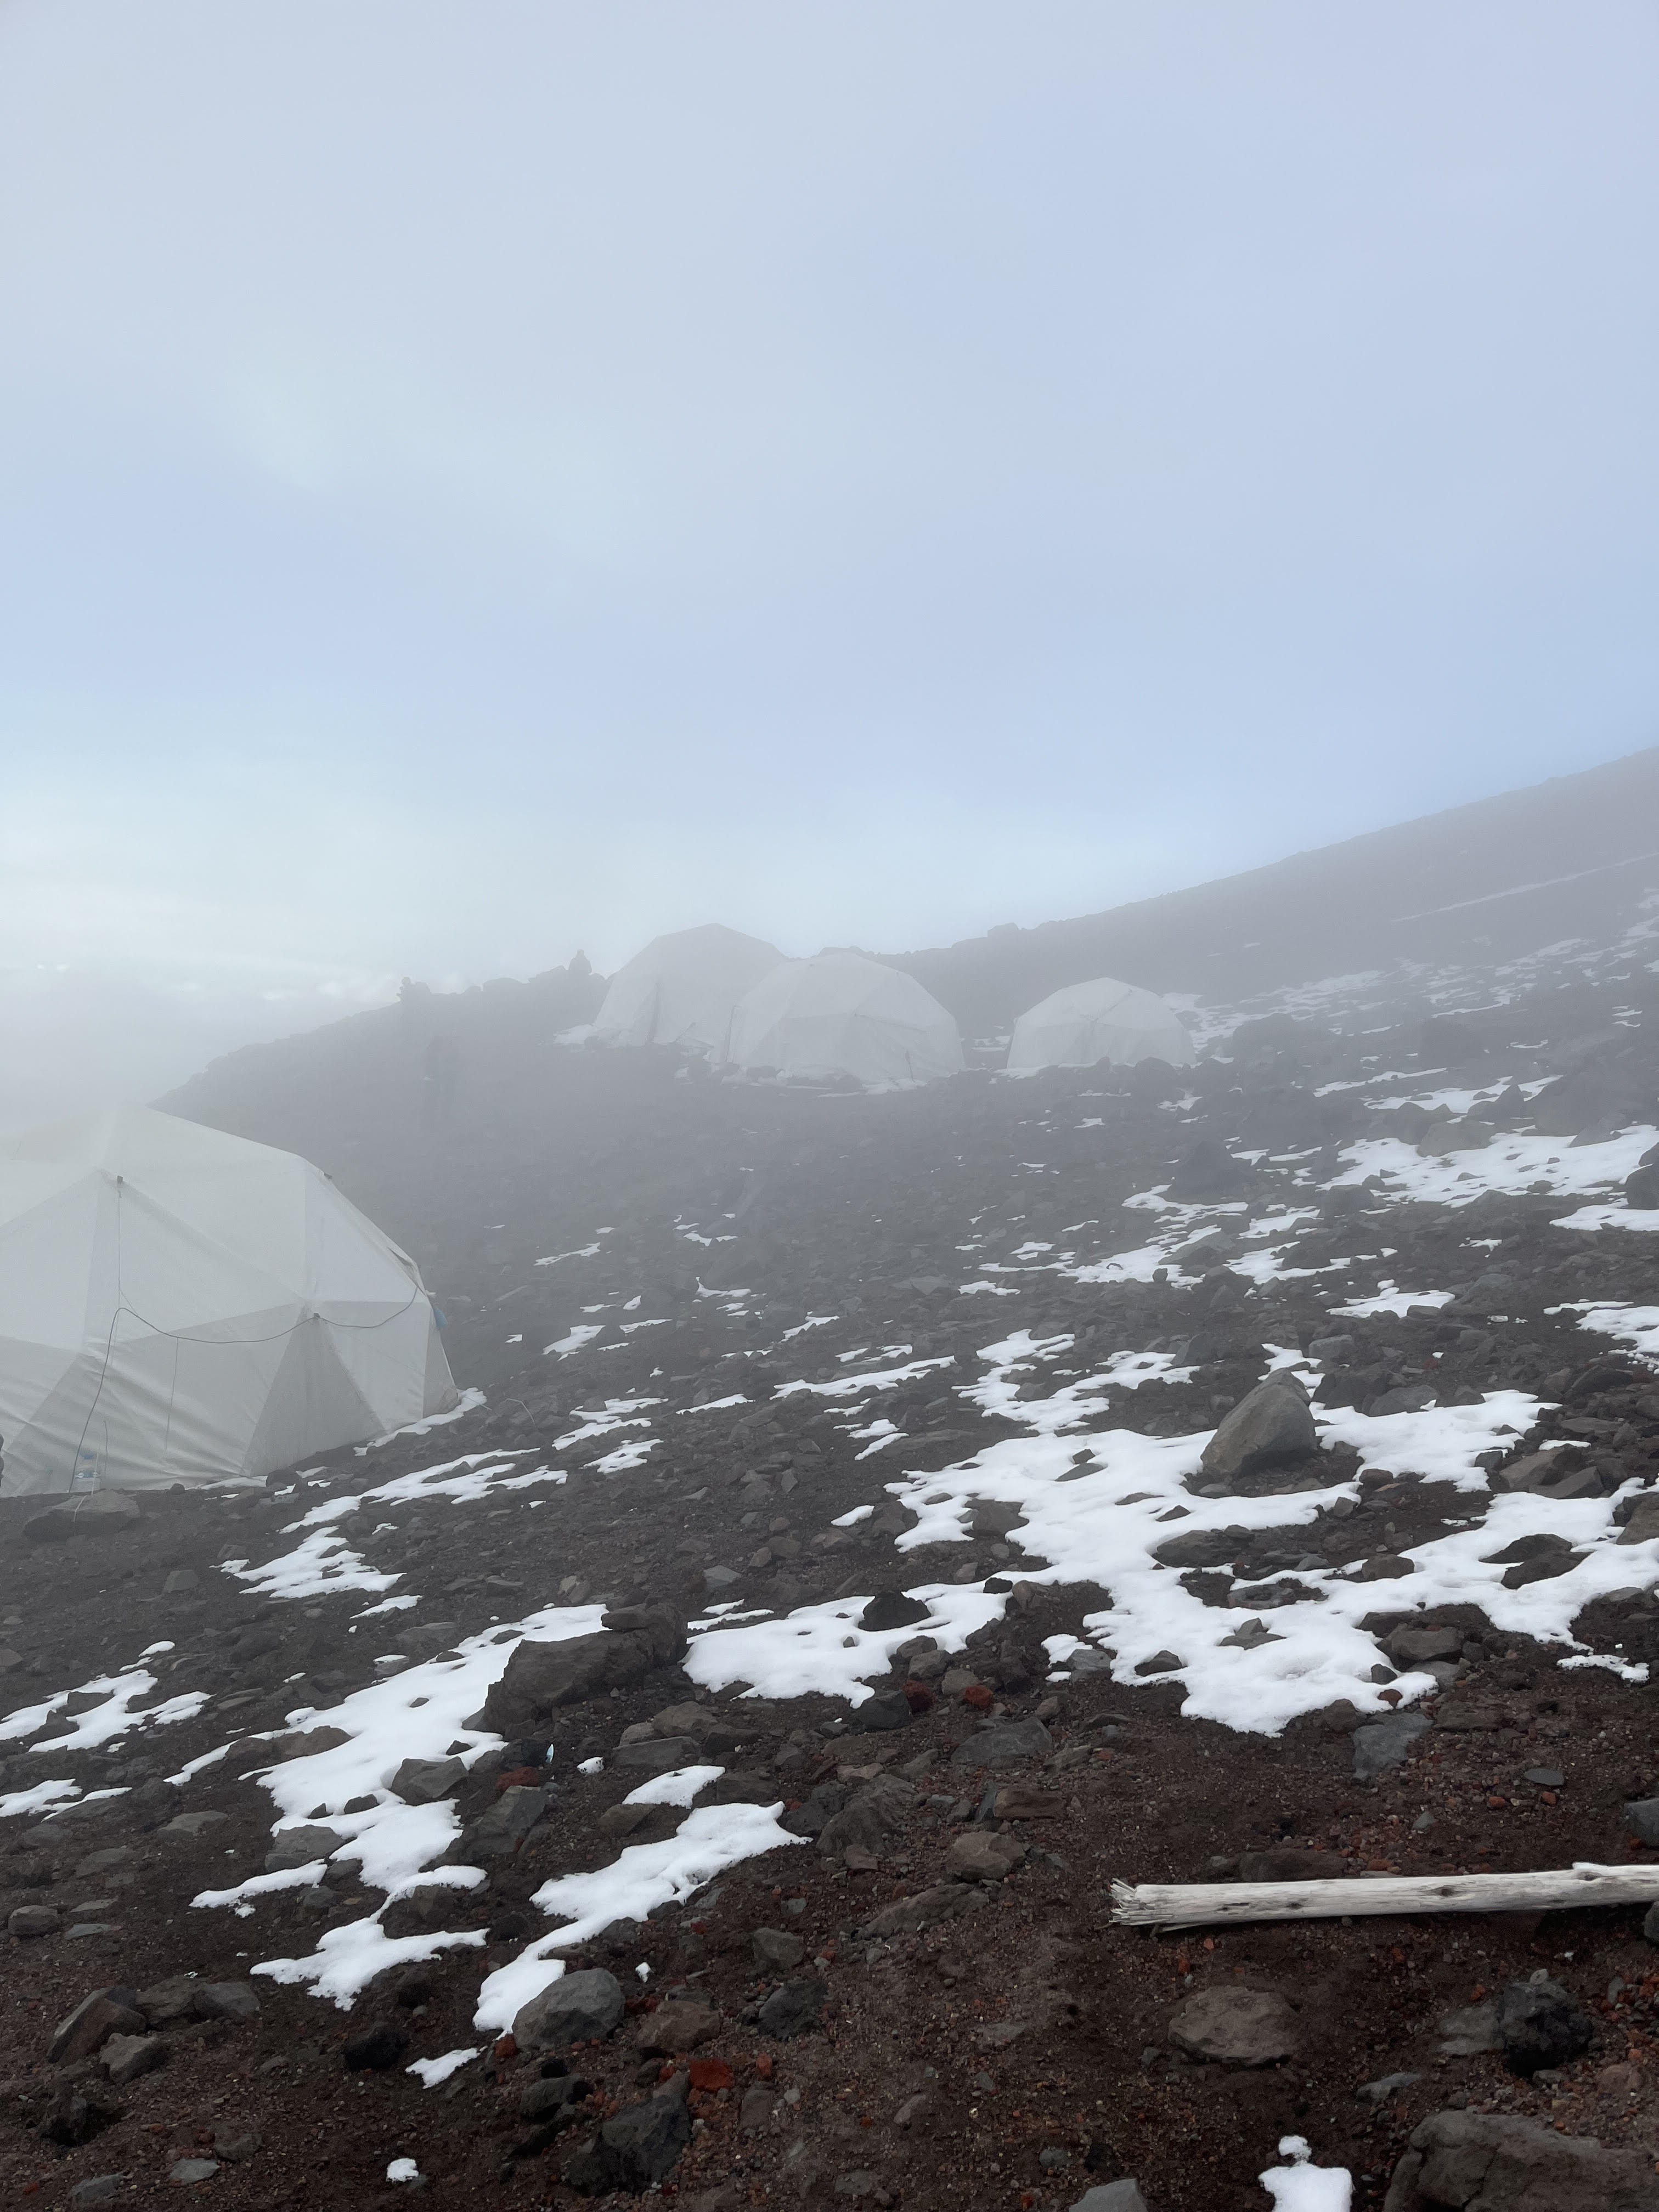 When we arrived at the high camp, it was covered in fog.